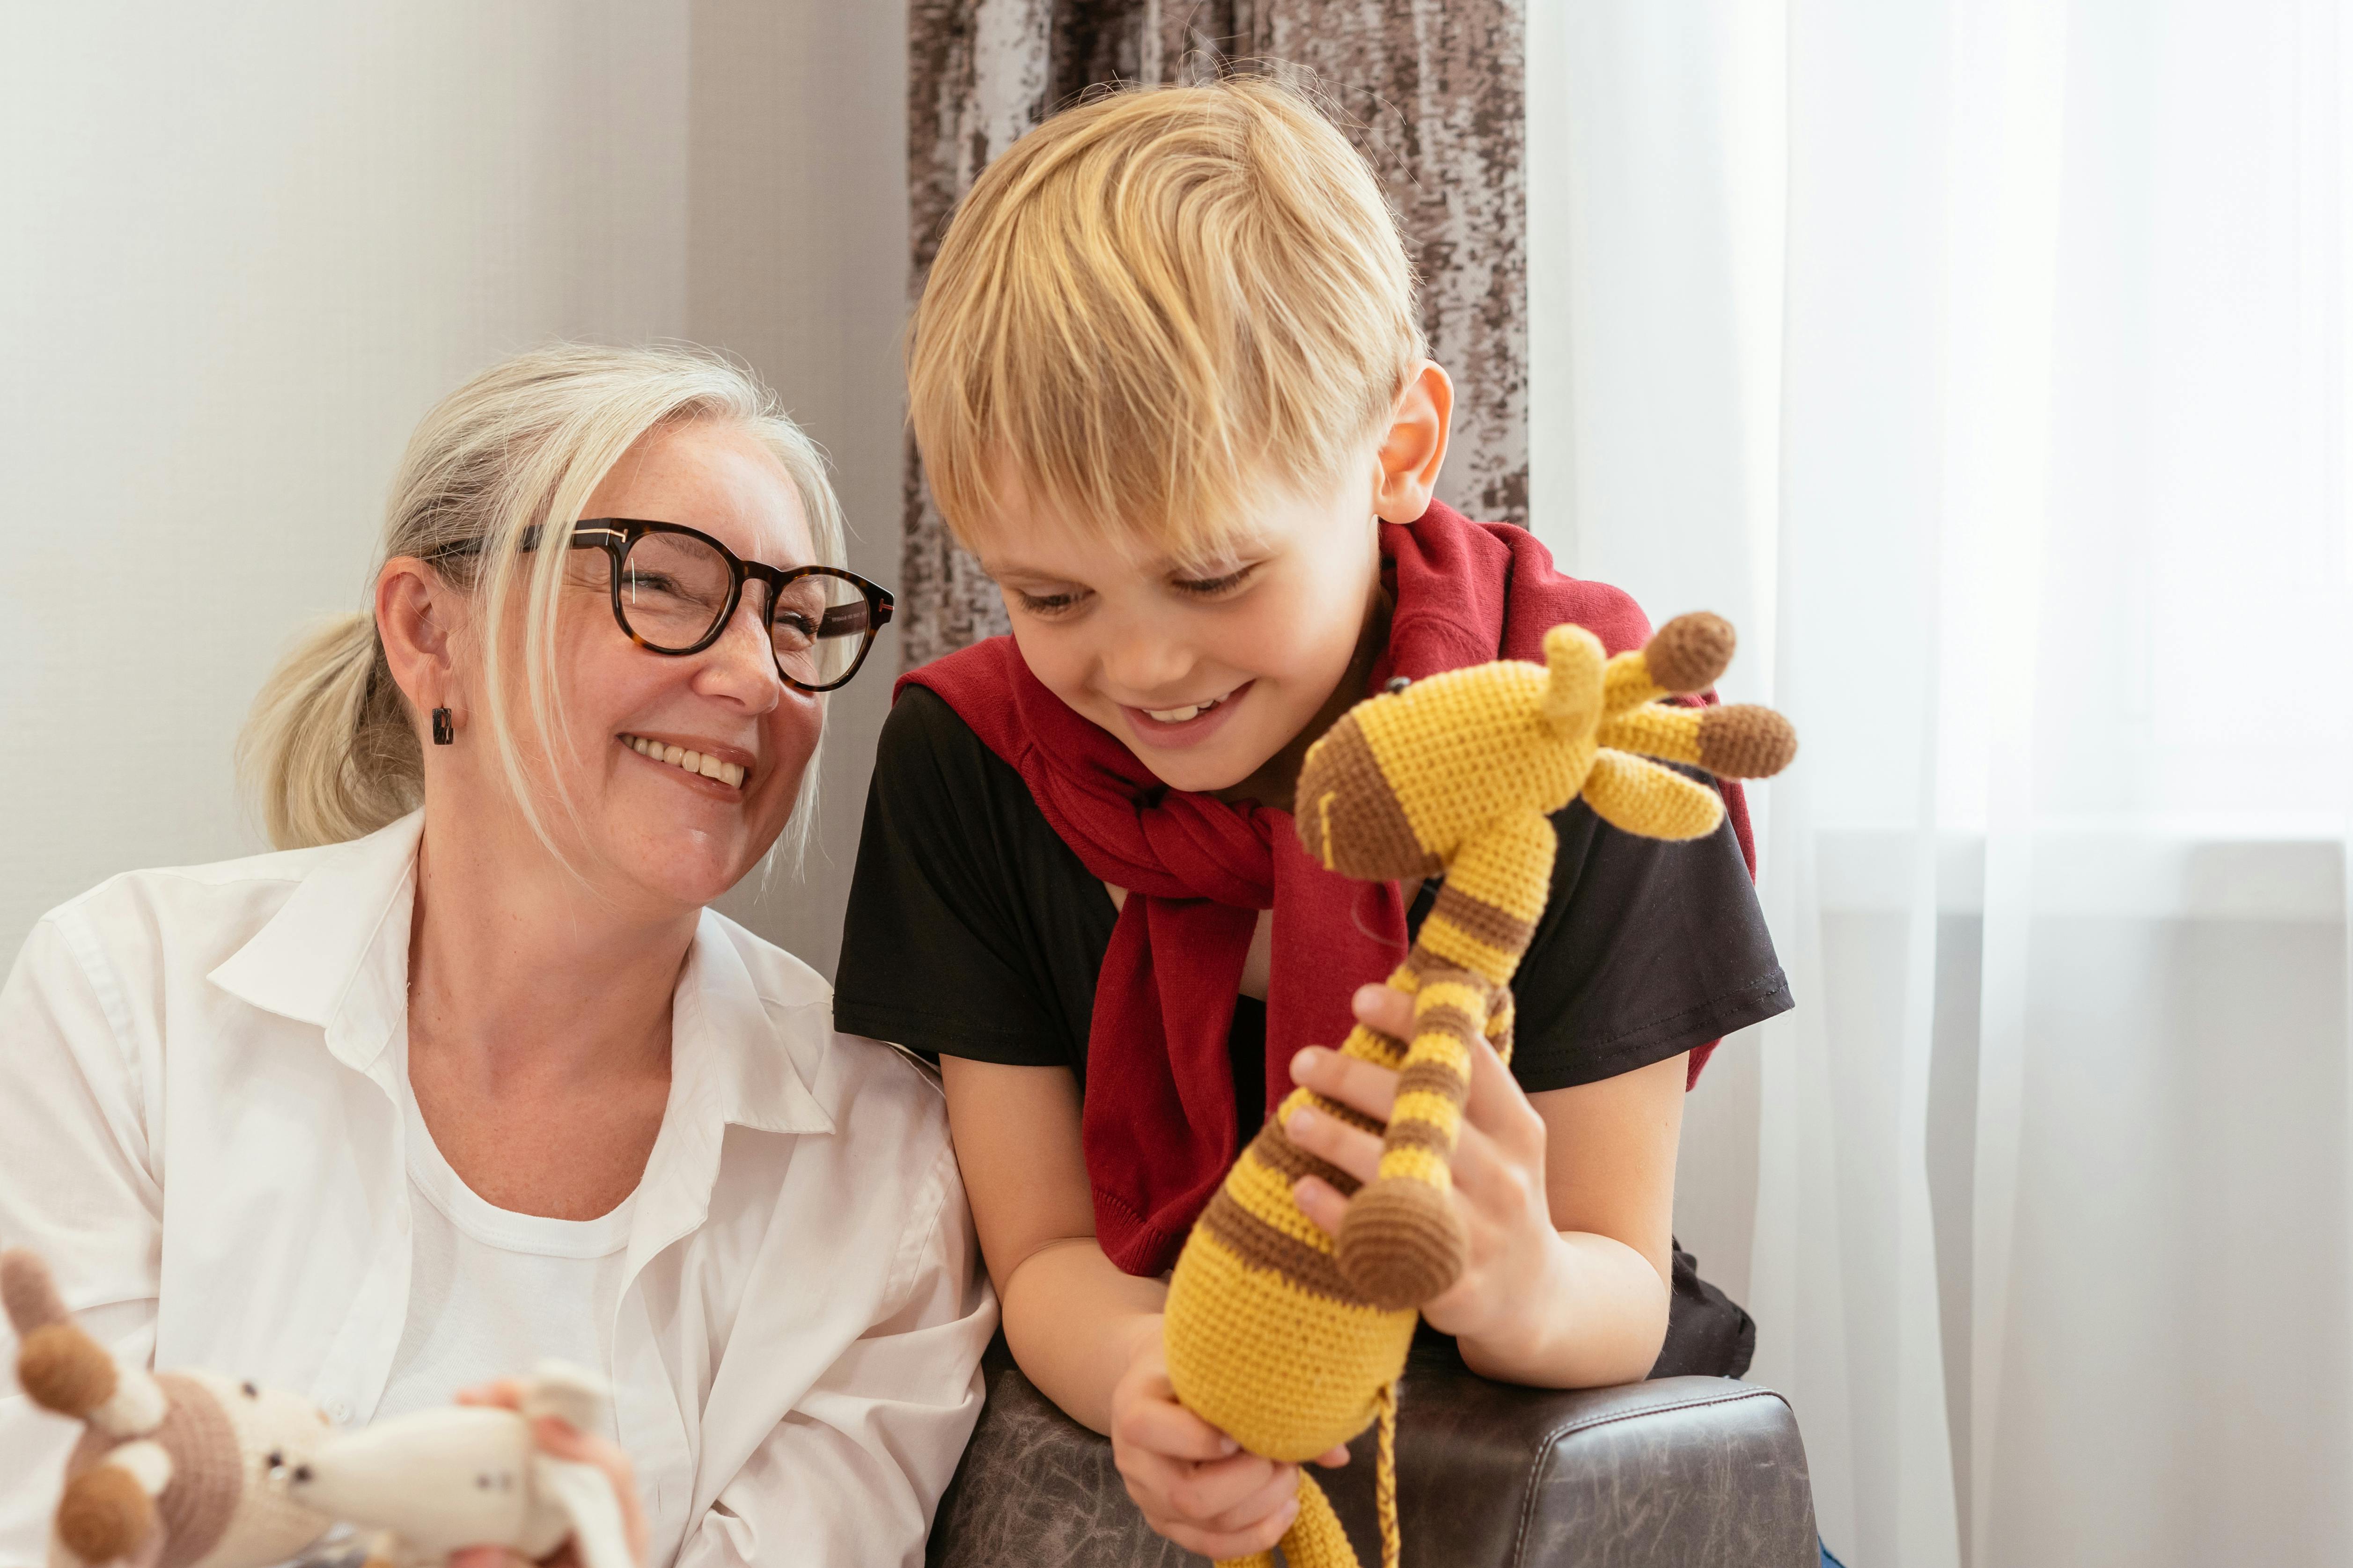 The woman spending time with one of her grandsons  | Source: Pexels